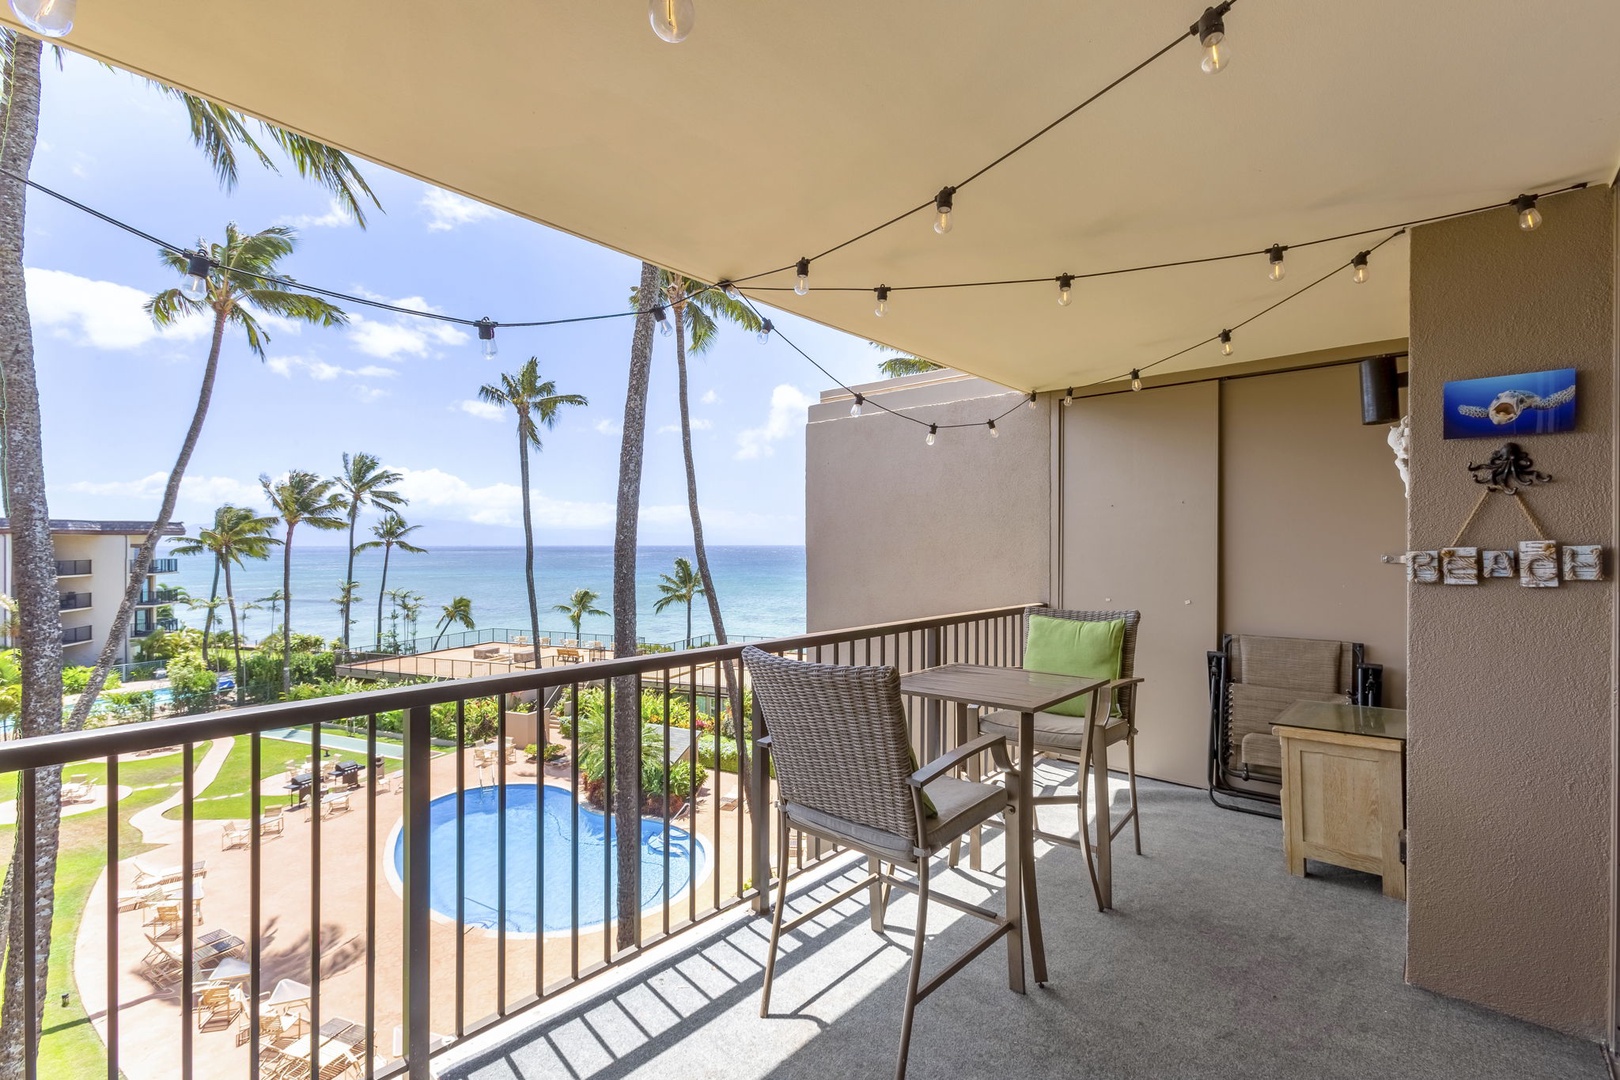 Private lanai with outdoor seating and stunning views